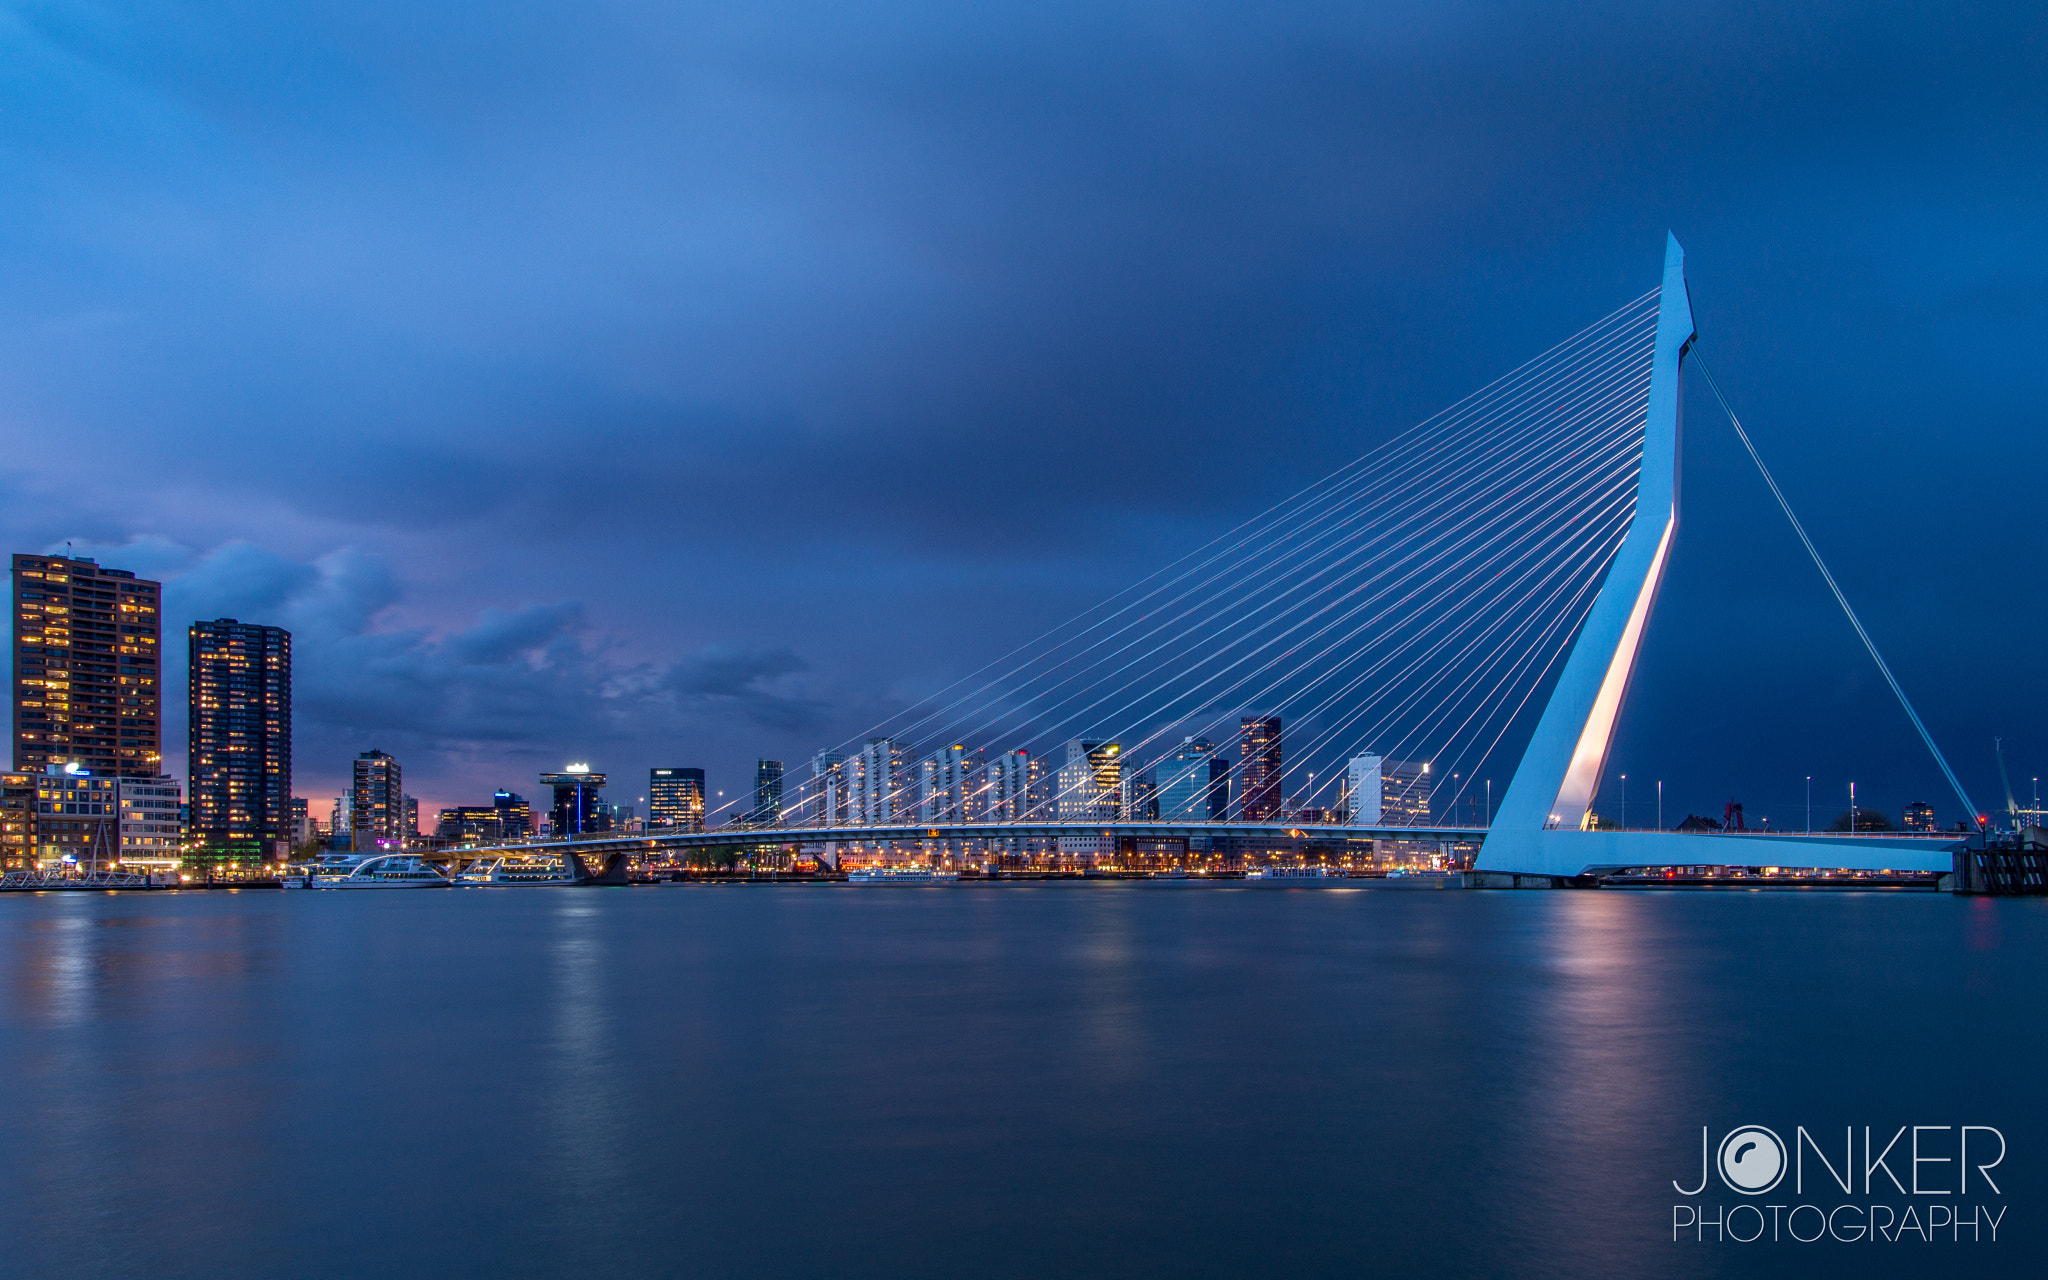 Sony SLT-A58 + Tamron 18-270mm F3.5-6.3 Di II PZD sample photo. Erasmusbrug after a nice sunset photography